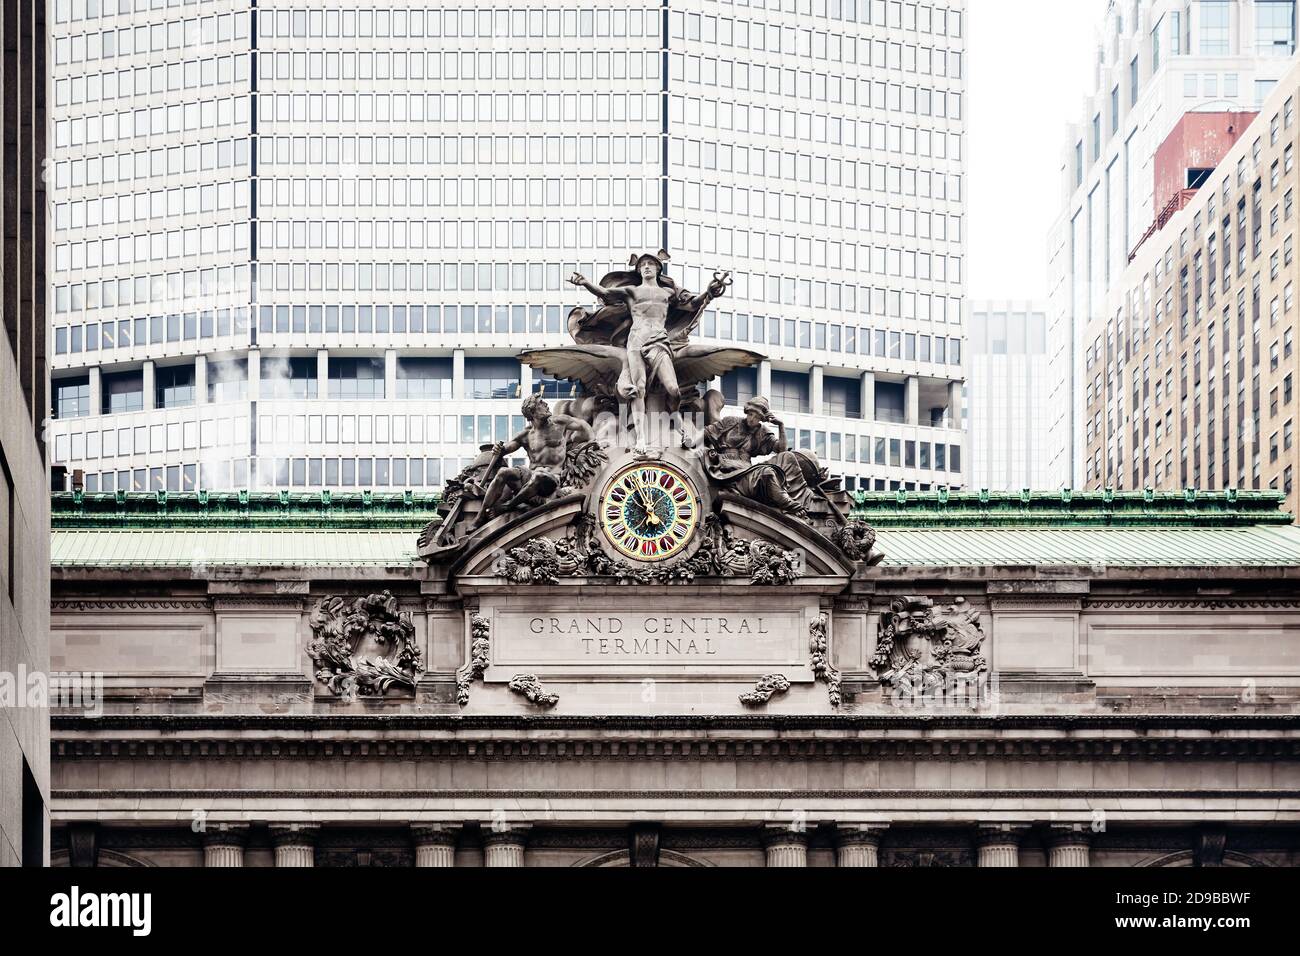 NEW YORK, USA - May 02, 2016: Grand Central Station in New York. Iconic statue of the Greek God Mercury that adorns the south facade of Grand Central Stock Photo